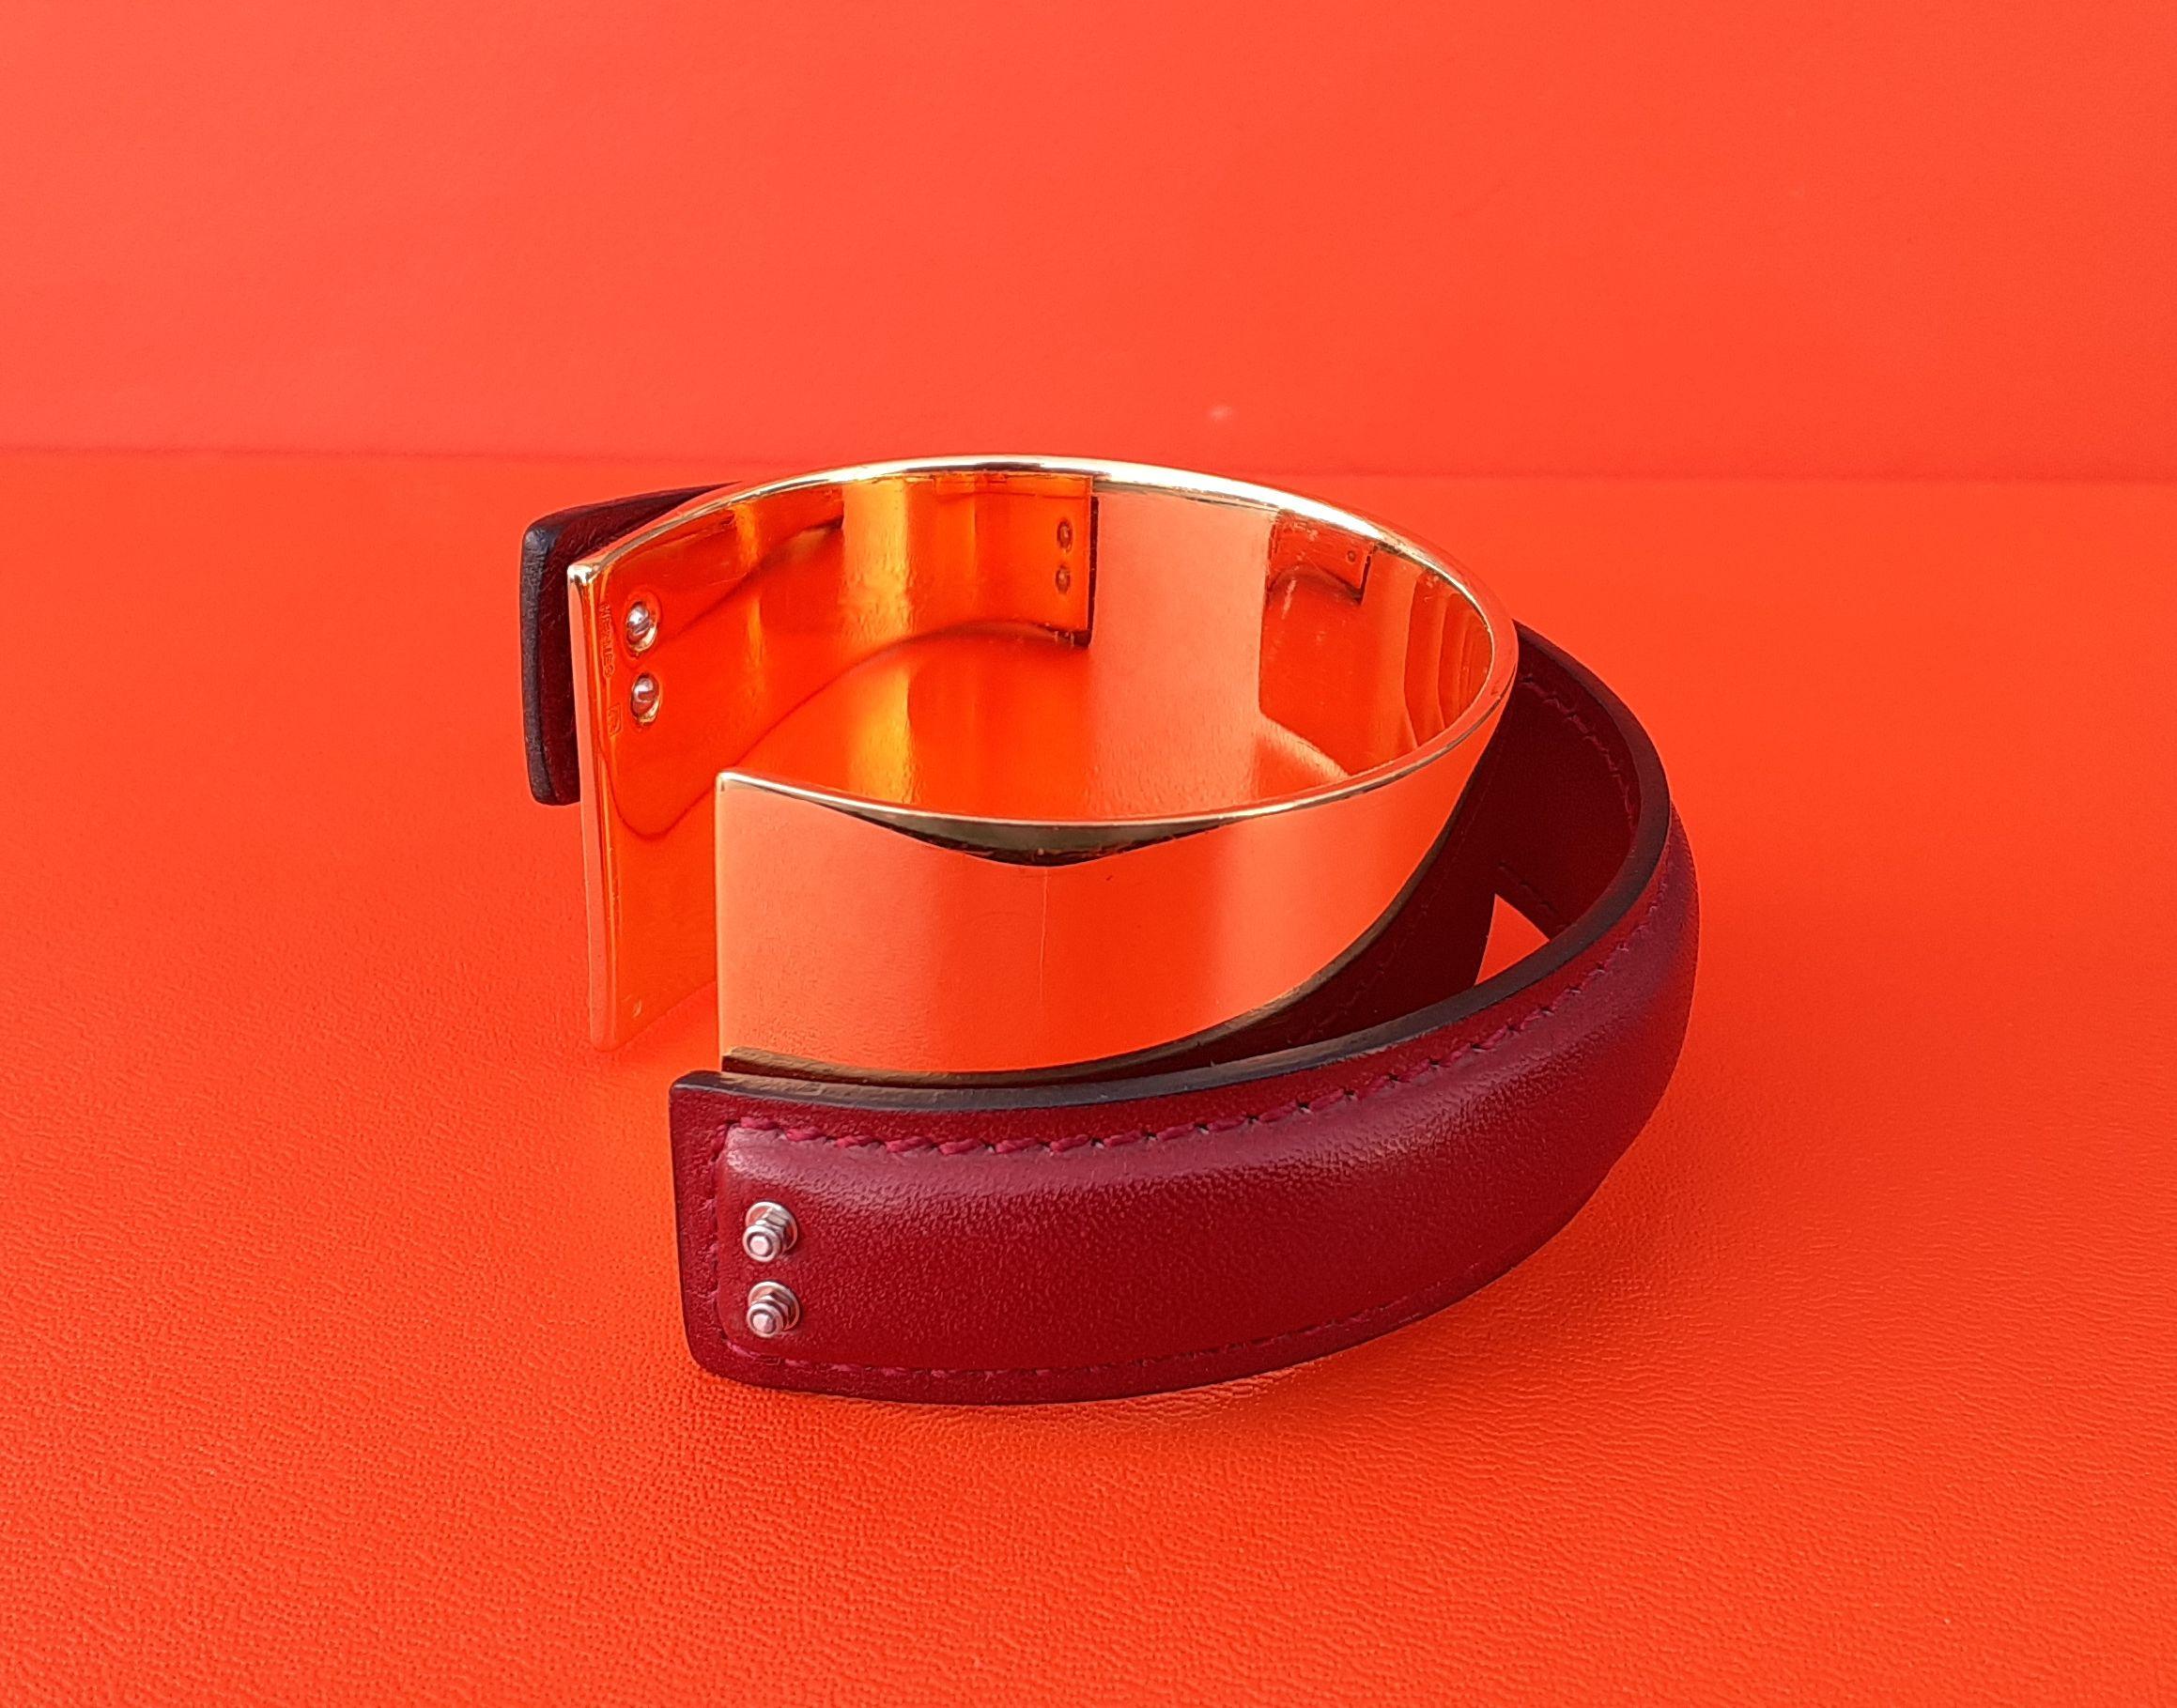 Exceptional Hermès Cuff Bracelet Golden Hdw and Rouge H Box Leather Size L For Sale 2